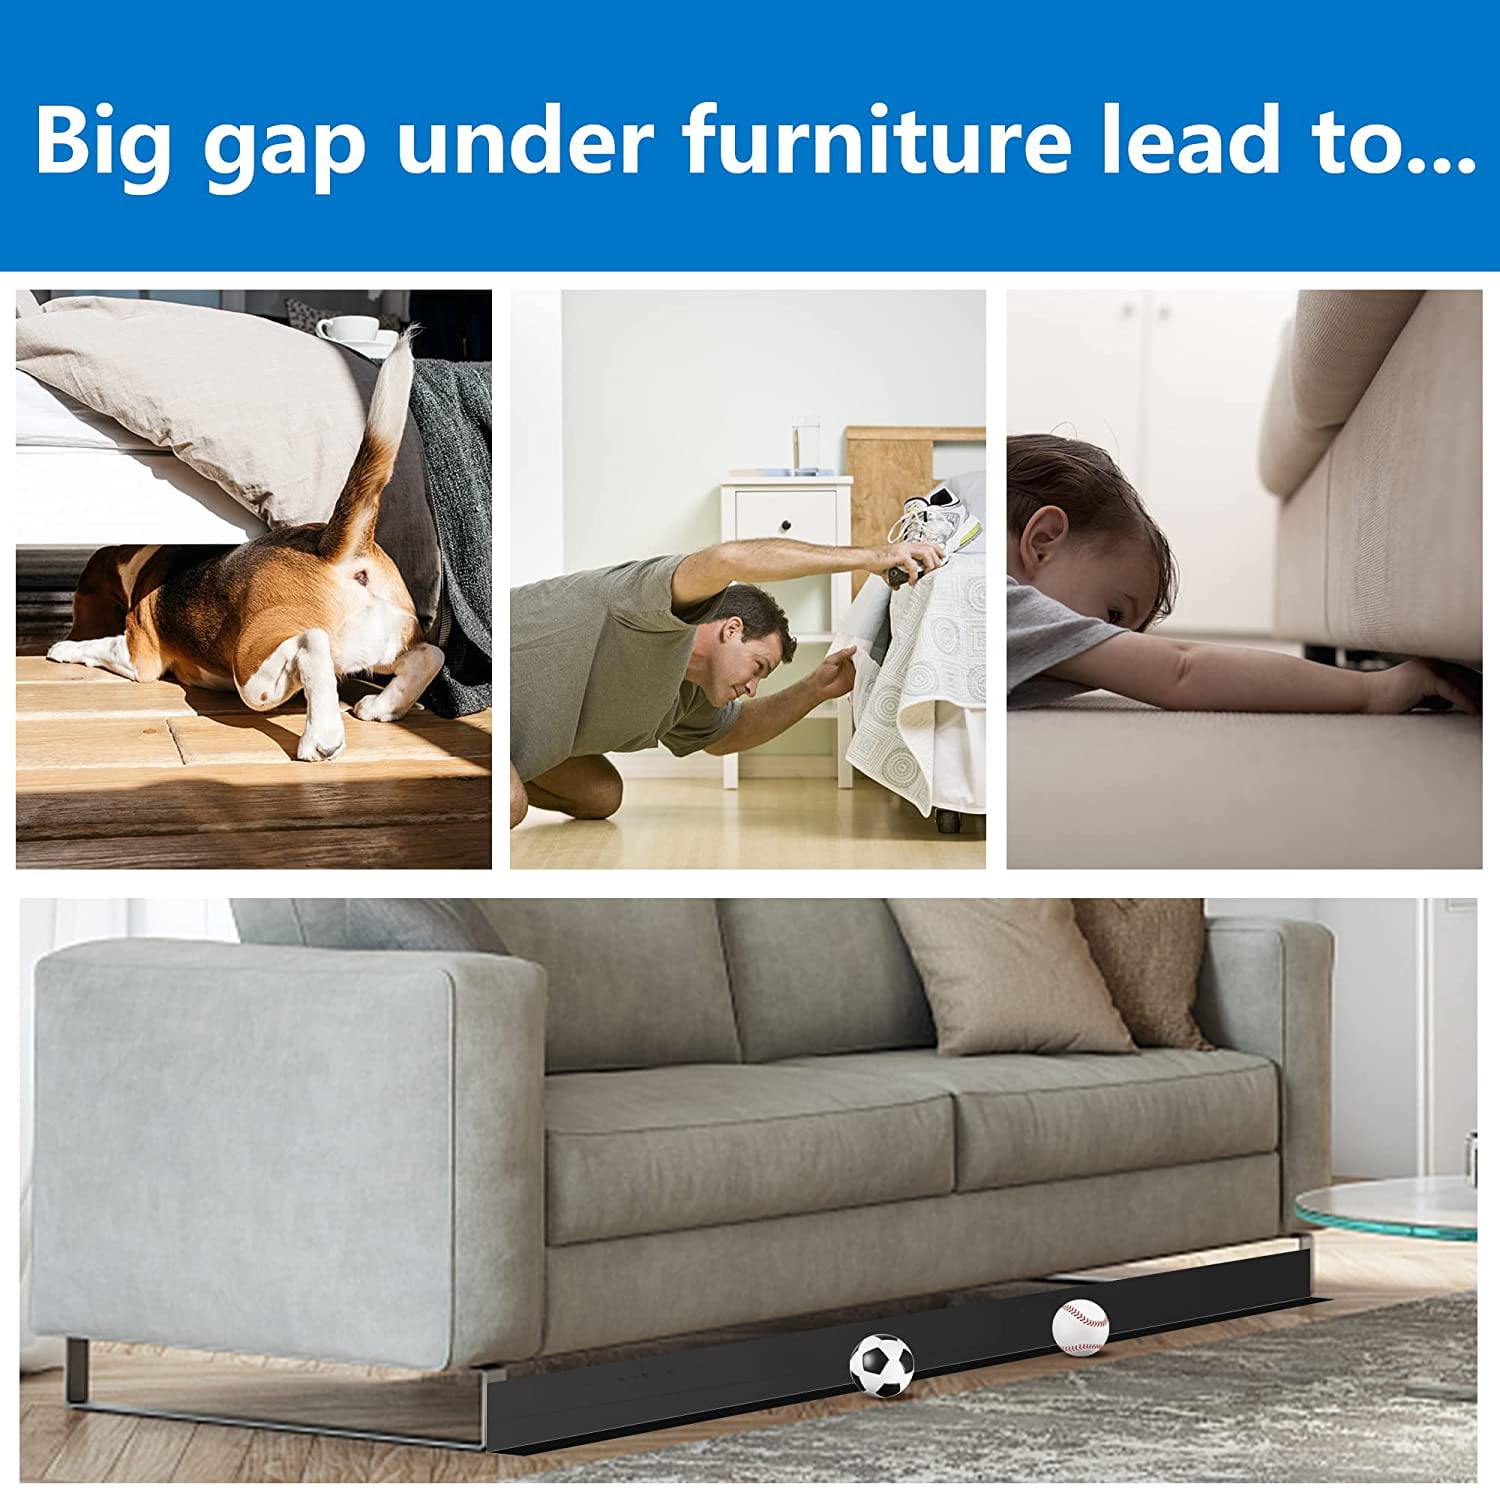 Gap Bumper: Stop Toys from Rolling Under Furniture, Couch | Block Toys,  Balls, Dirt, Dust | No Tools, Measuring, Cutting or Sticking | Ball Stopper  